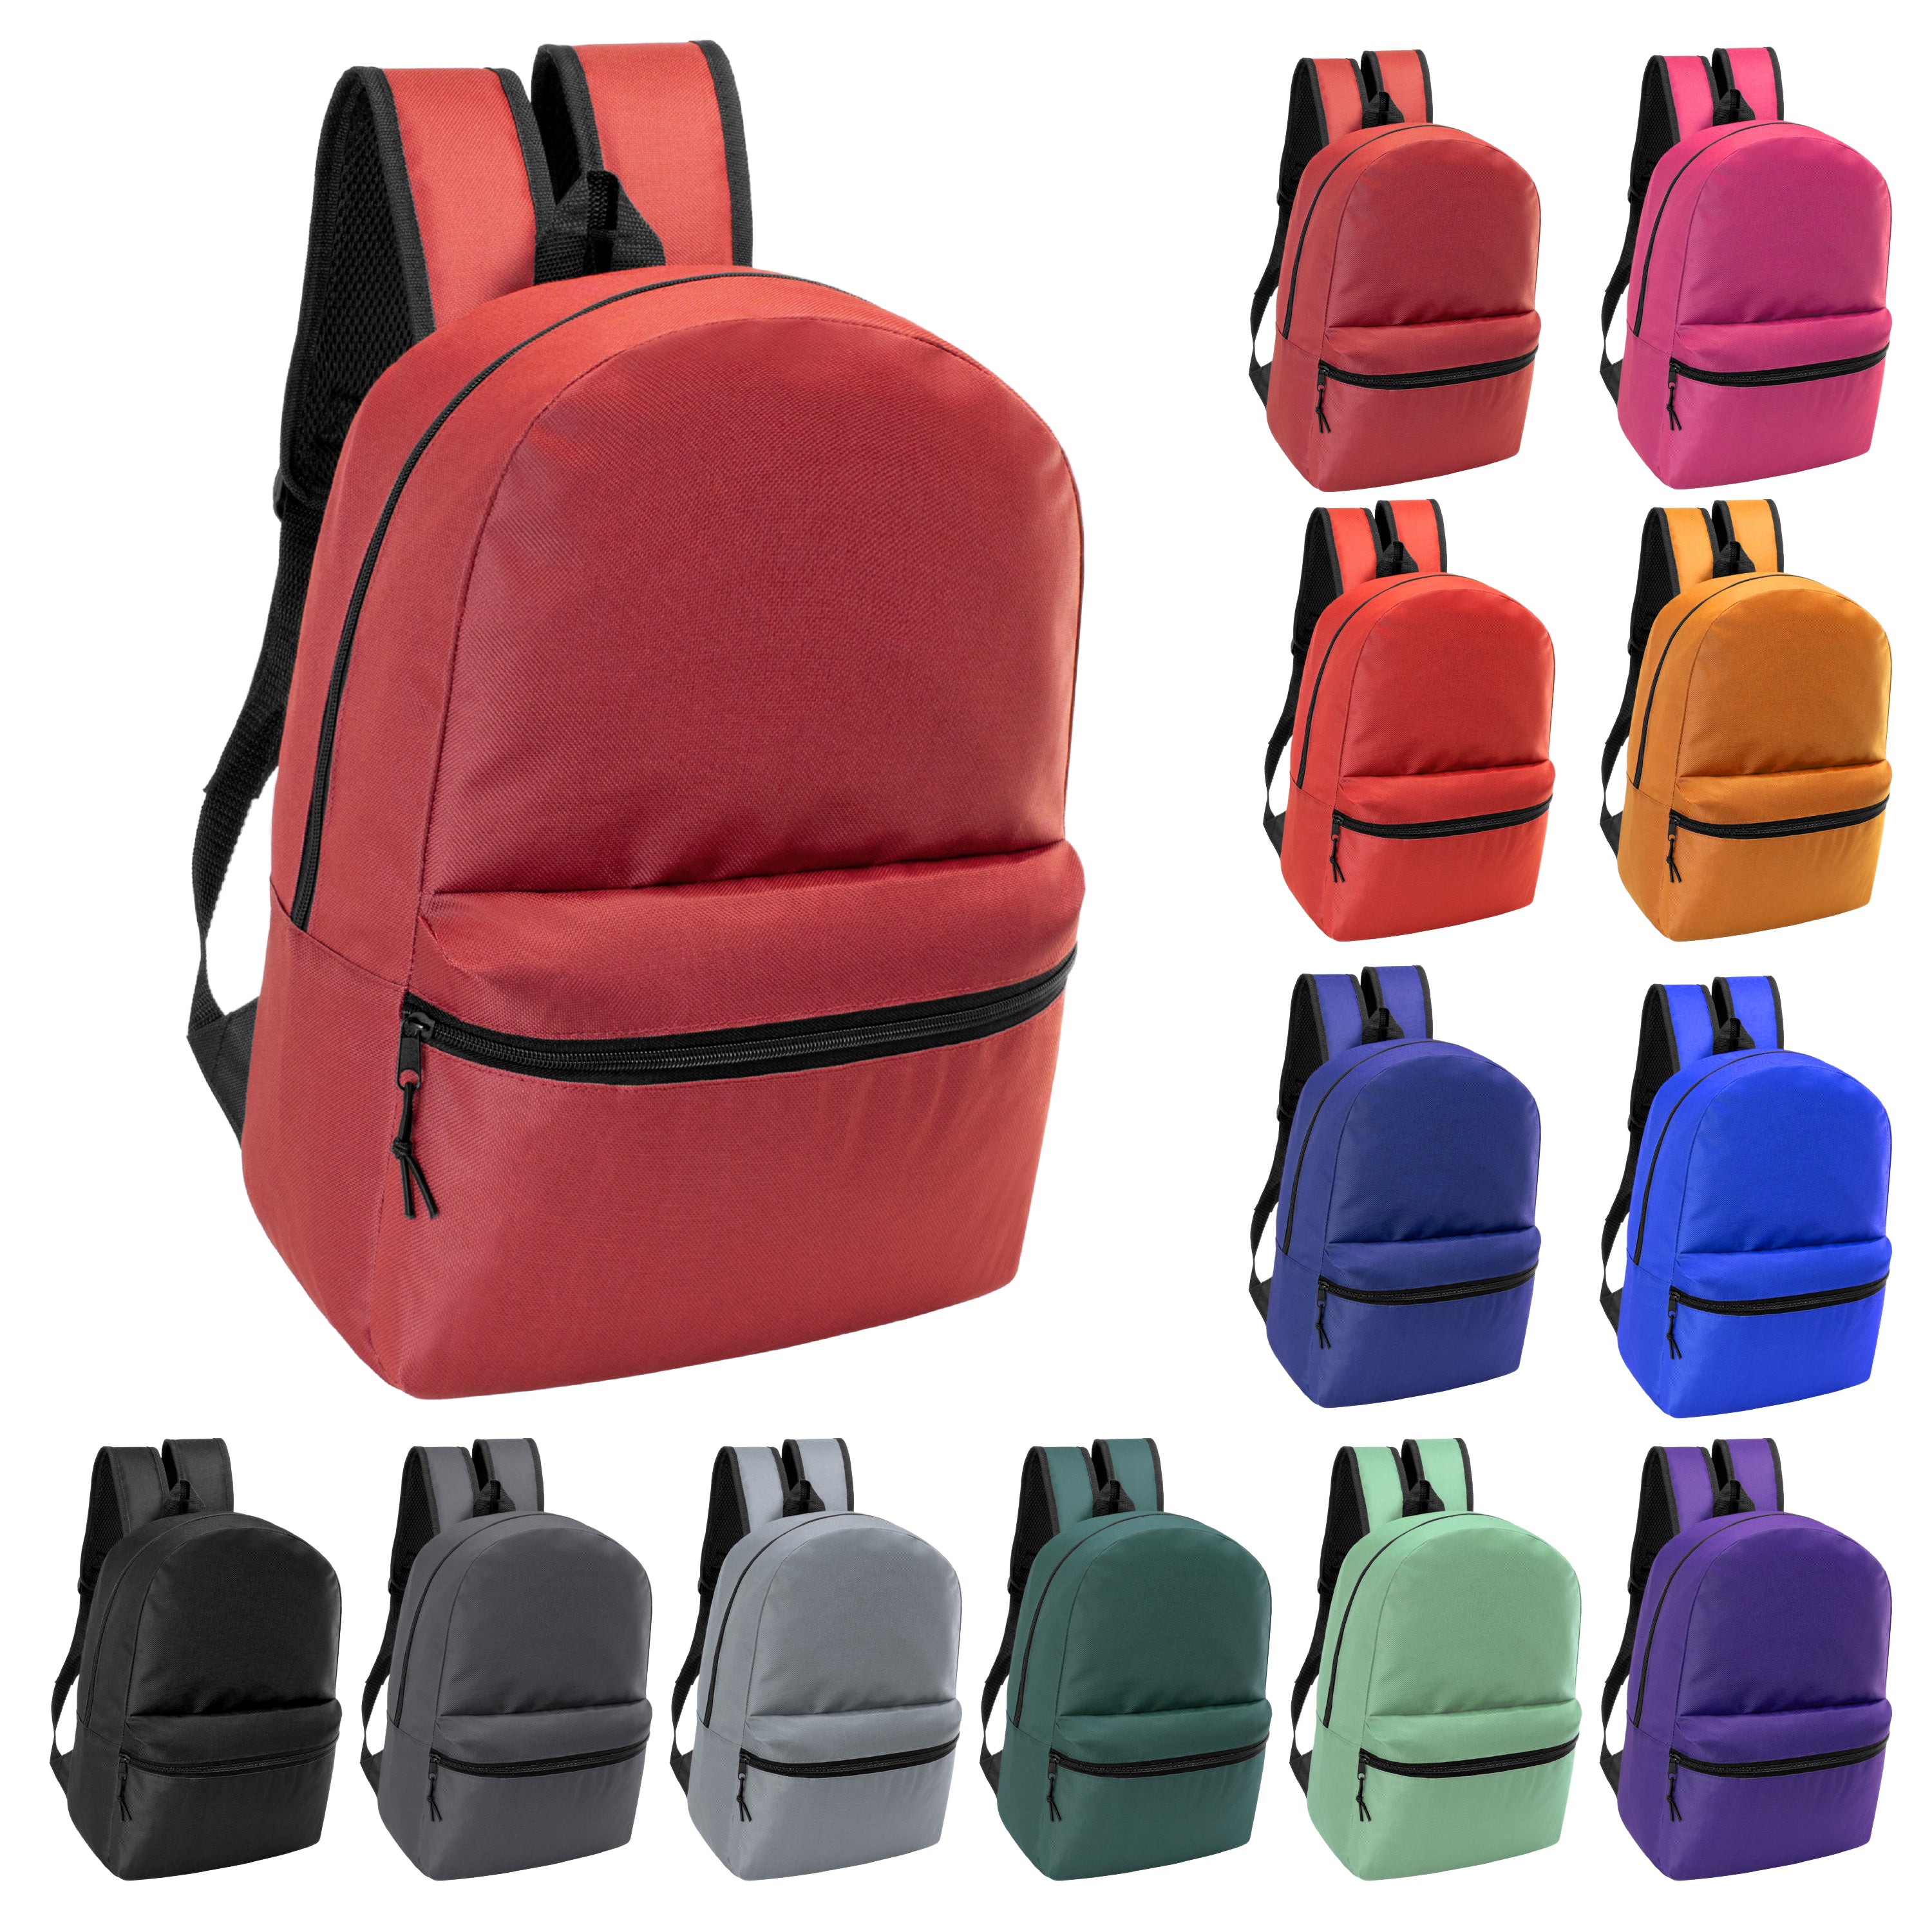 17" wholesale backpack in bulk cheap price